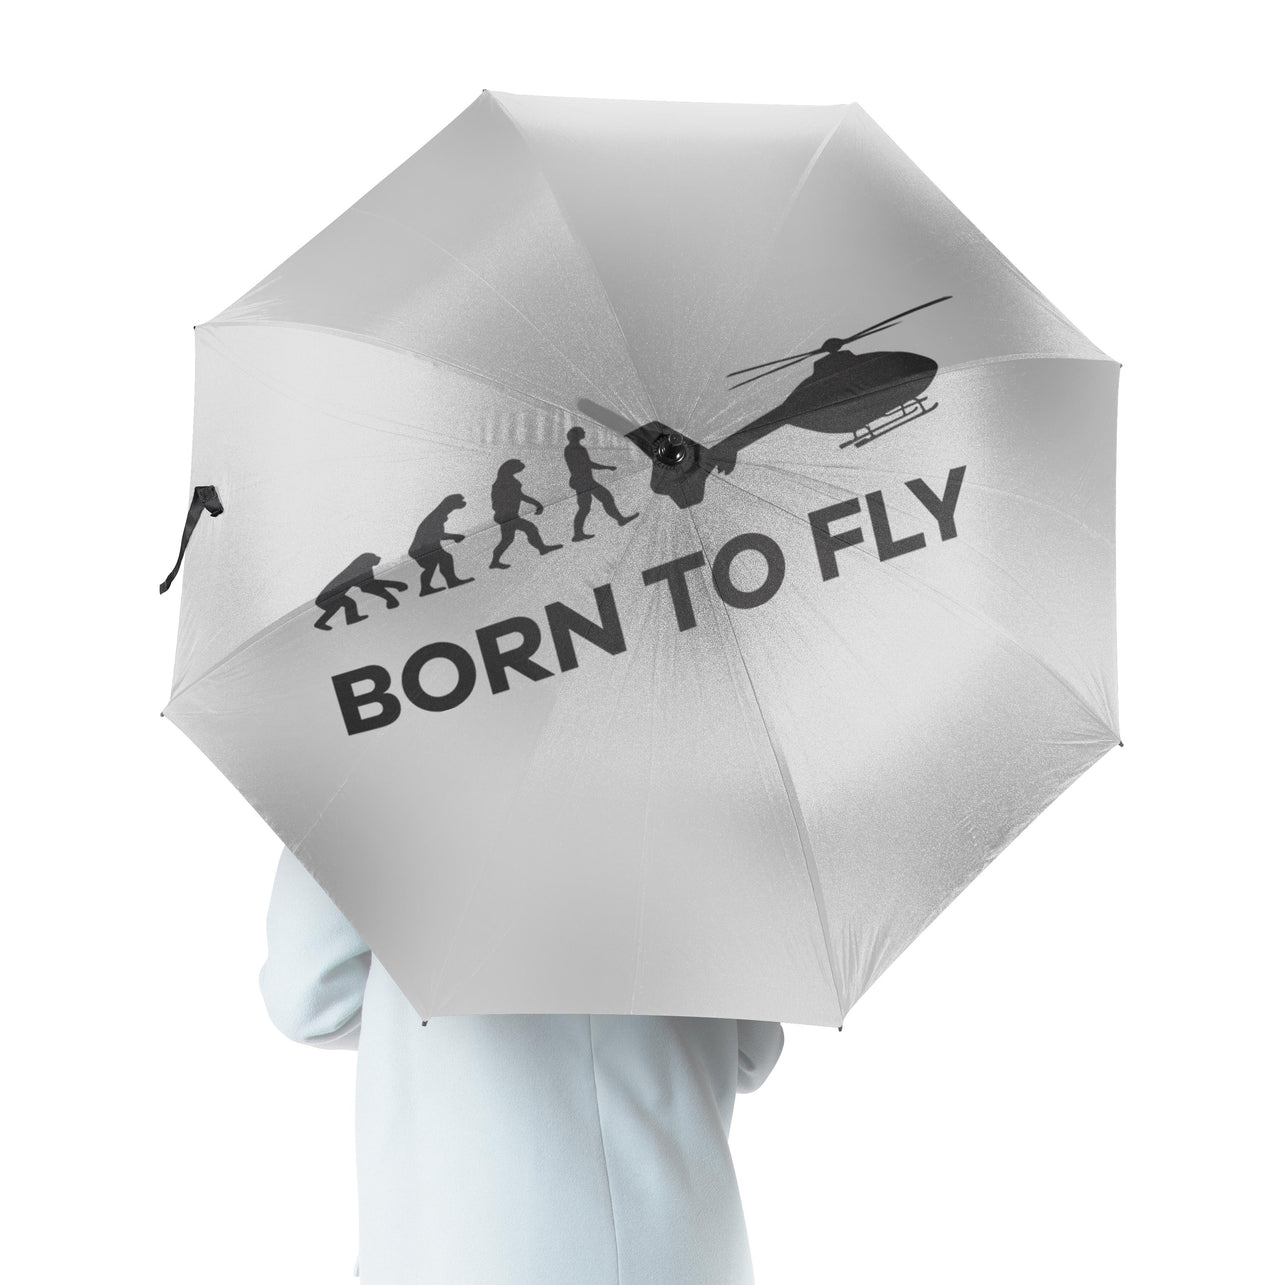 Born To Fly Helicopter Designed Umbrella